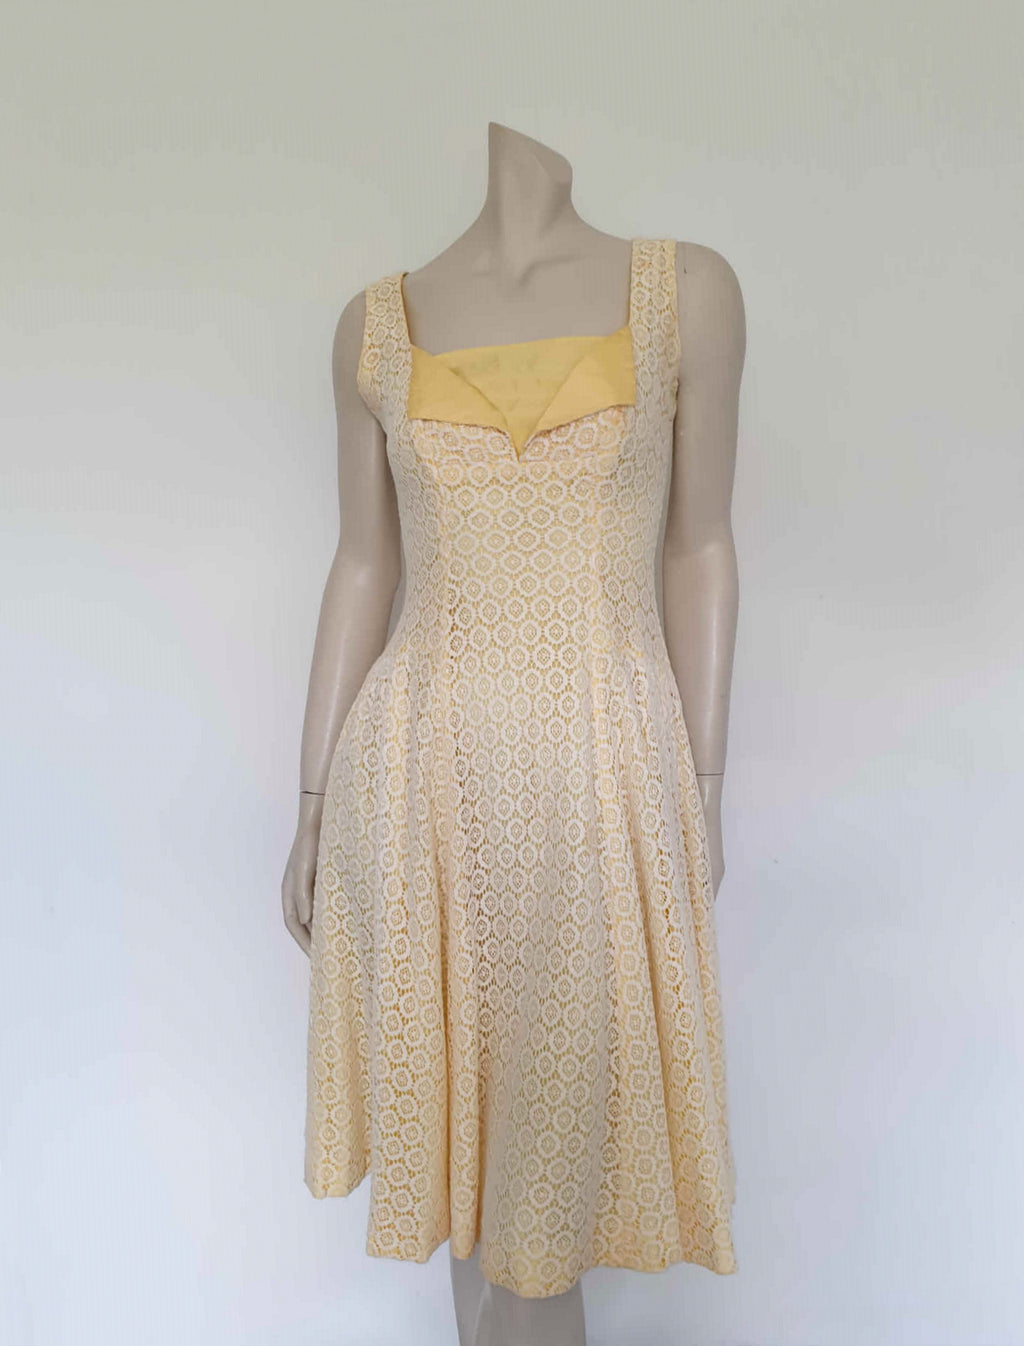 1960s vintage yellow and white lace dress by francine for you